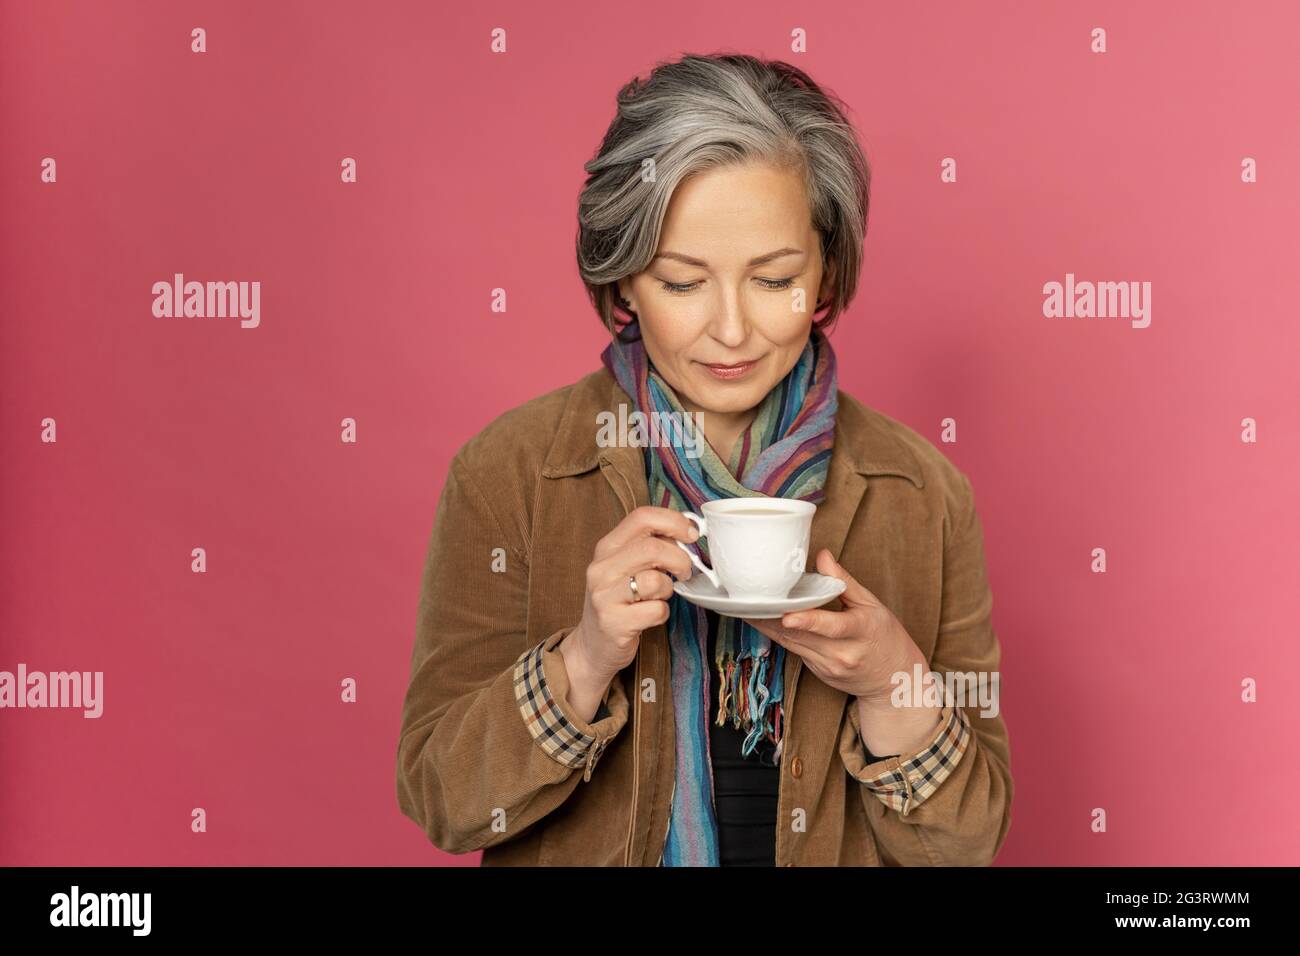 Charming elegant woman drinks coffee or tea holding white cup looking on it. Isolated on pink background with copy space. Studio Stock Photo